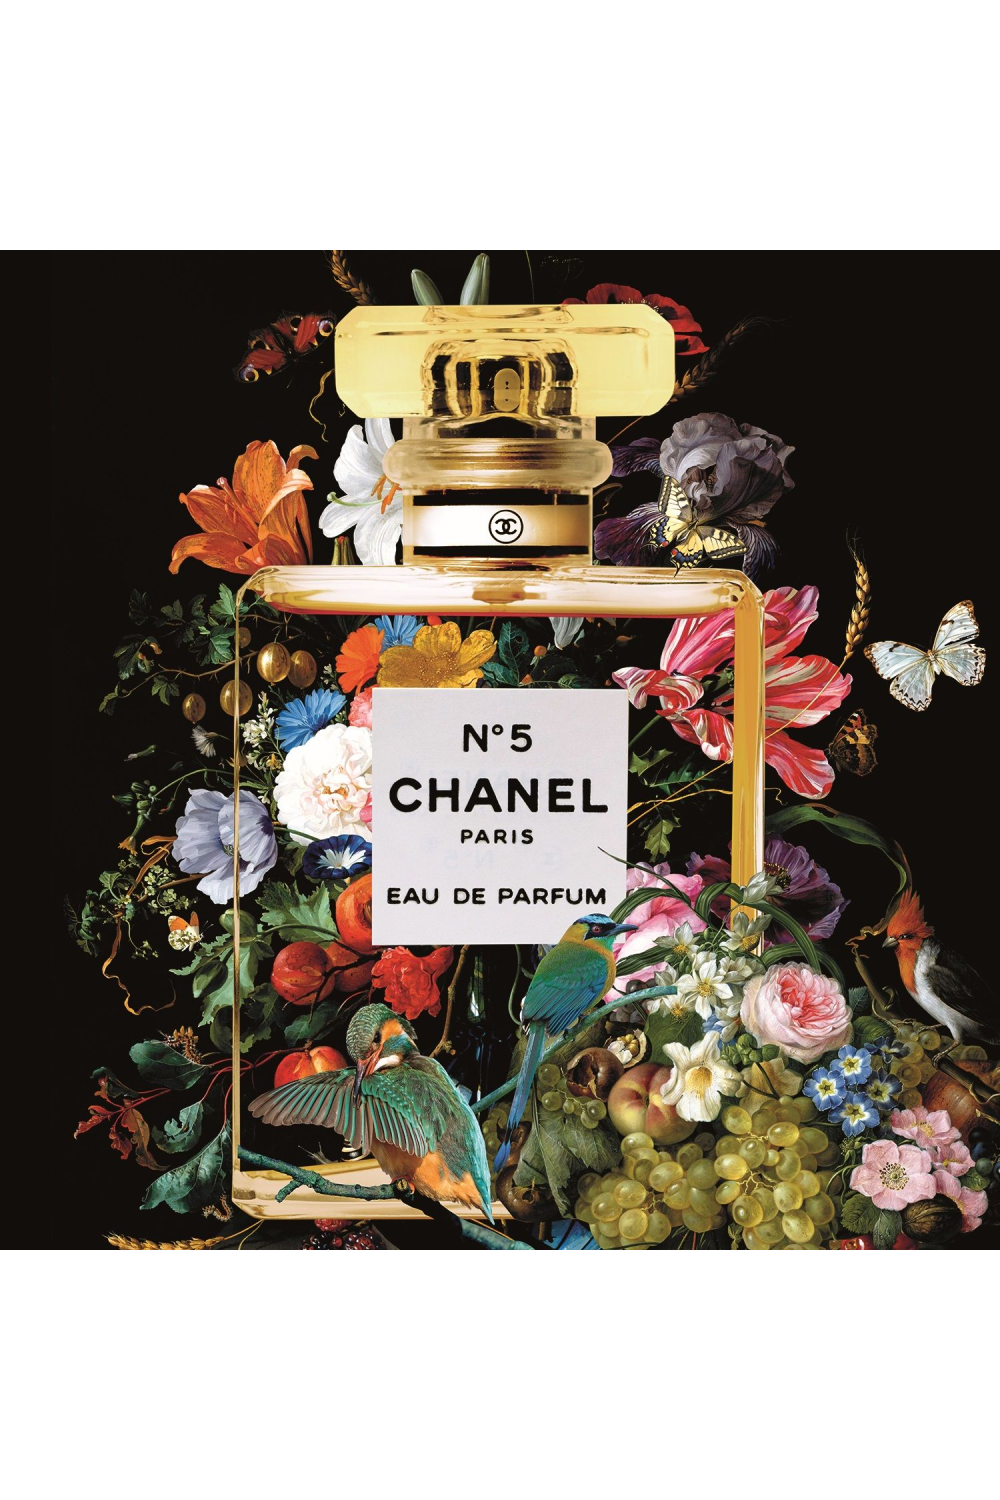 3) Assorted Chanel Groupings Of Perfume Bottles Auction